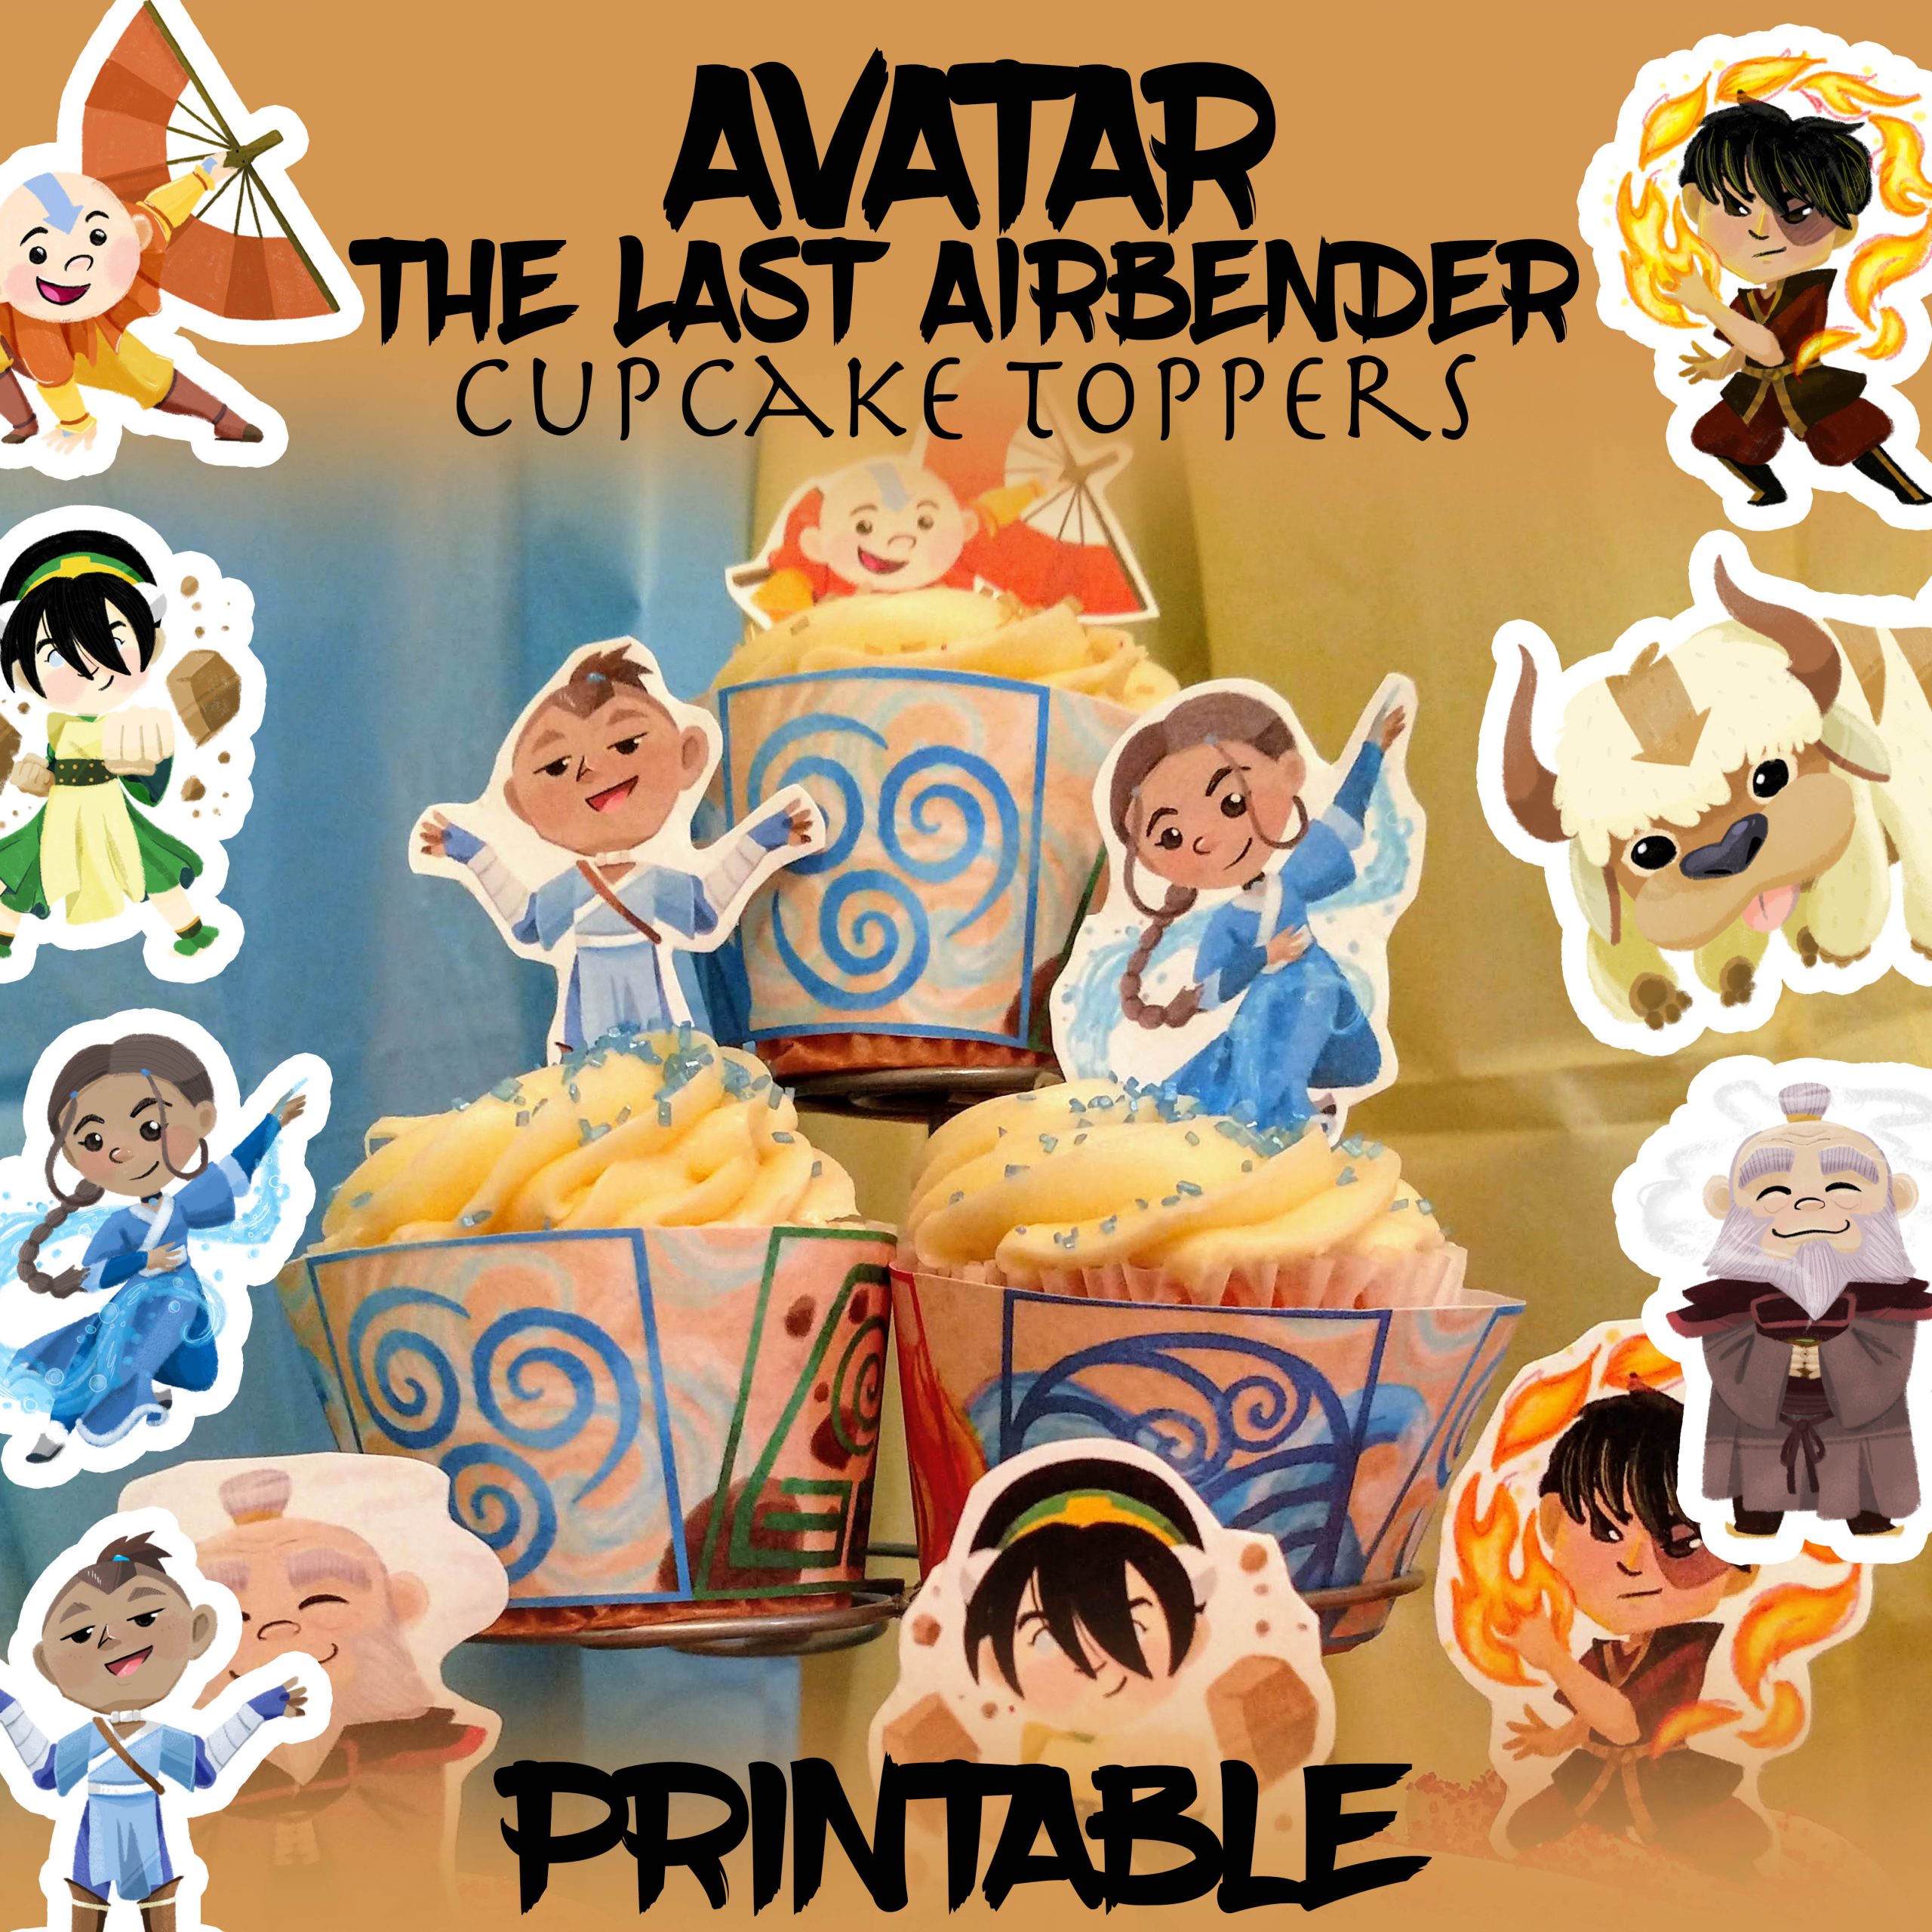 Download Avatar The Last Airbender Party Cupcake Toppers My Nerd Nursery